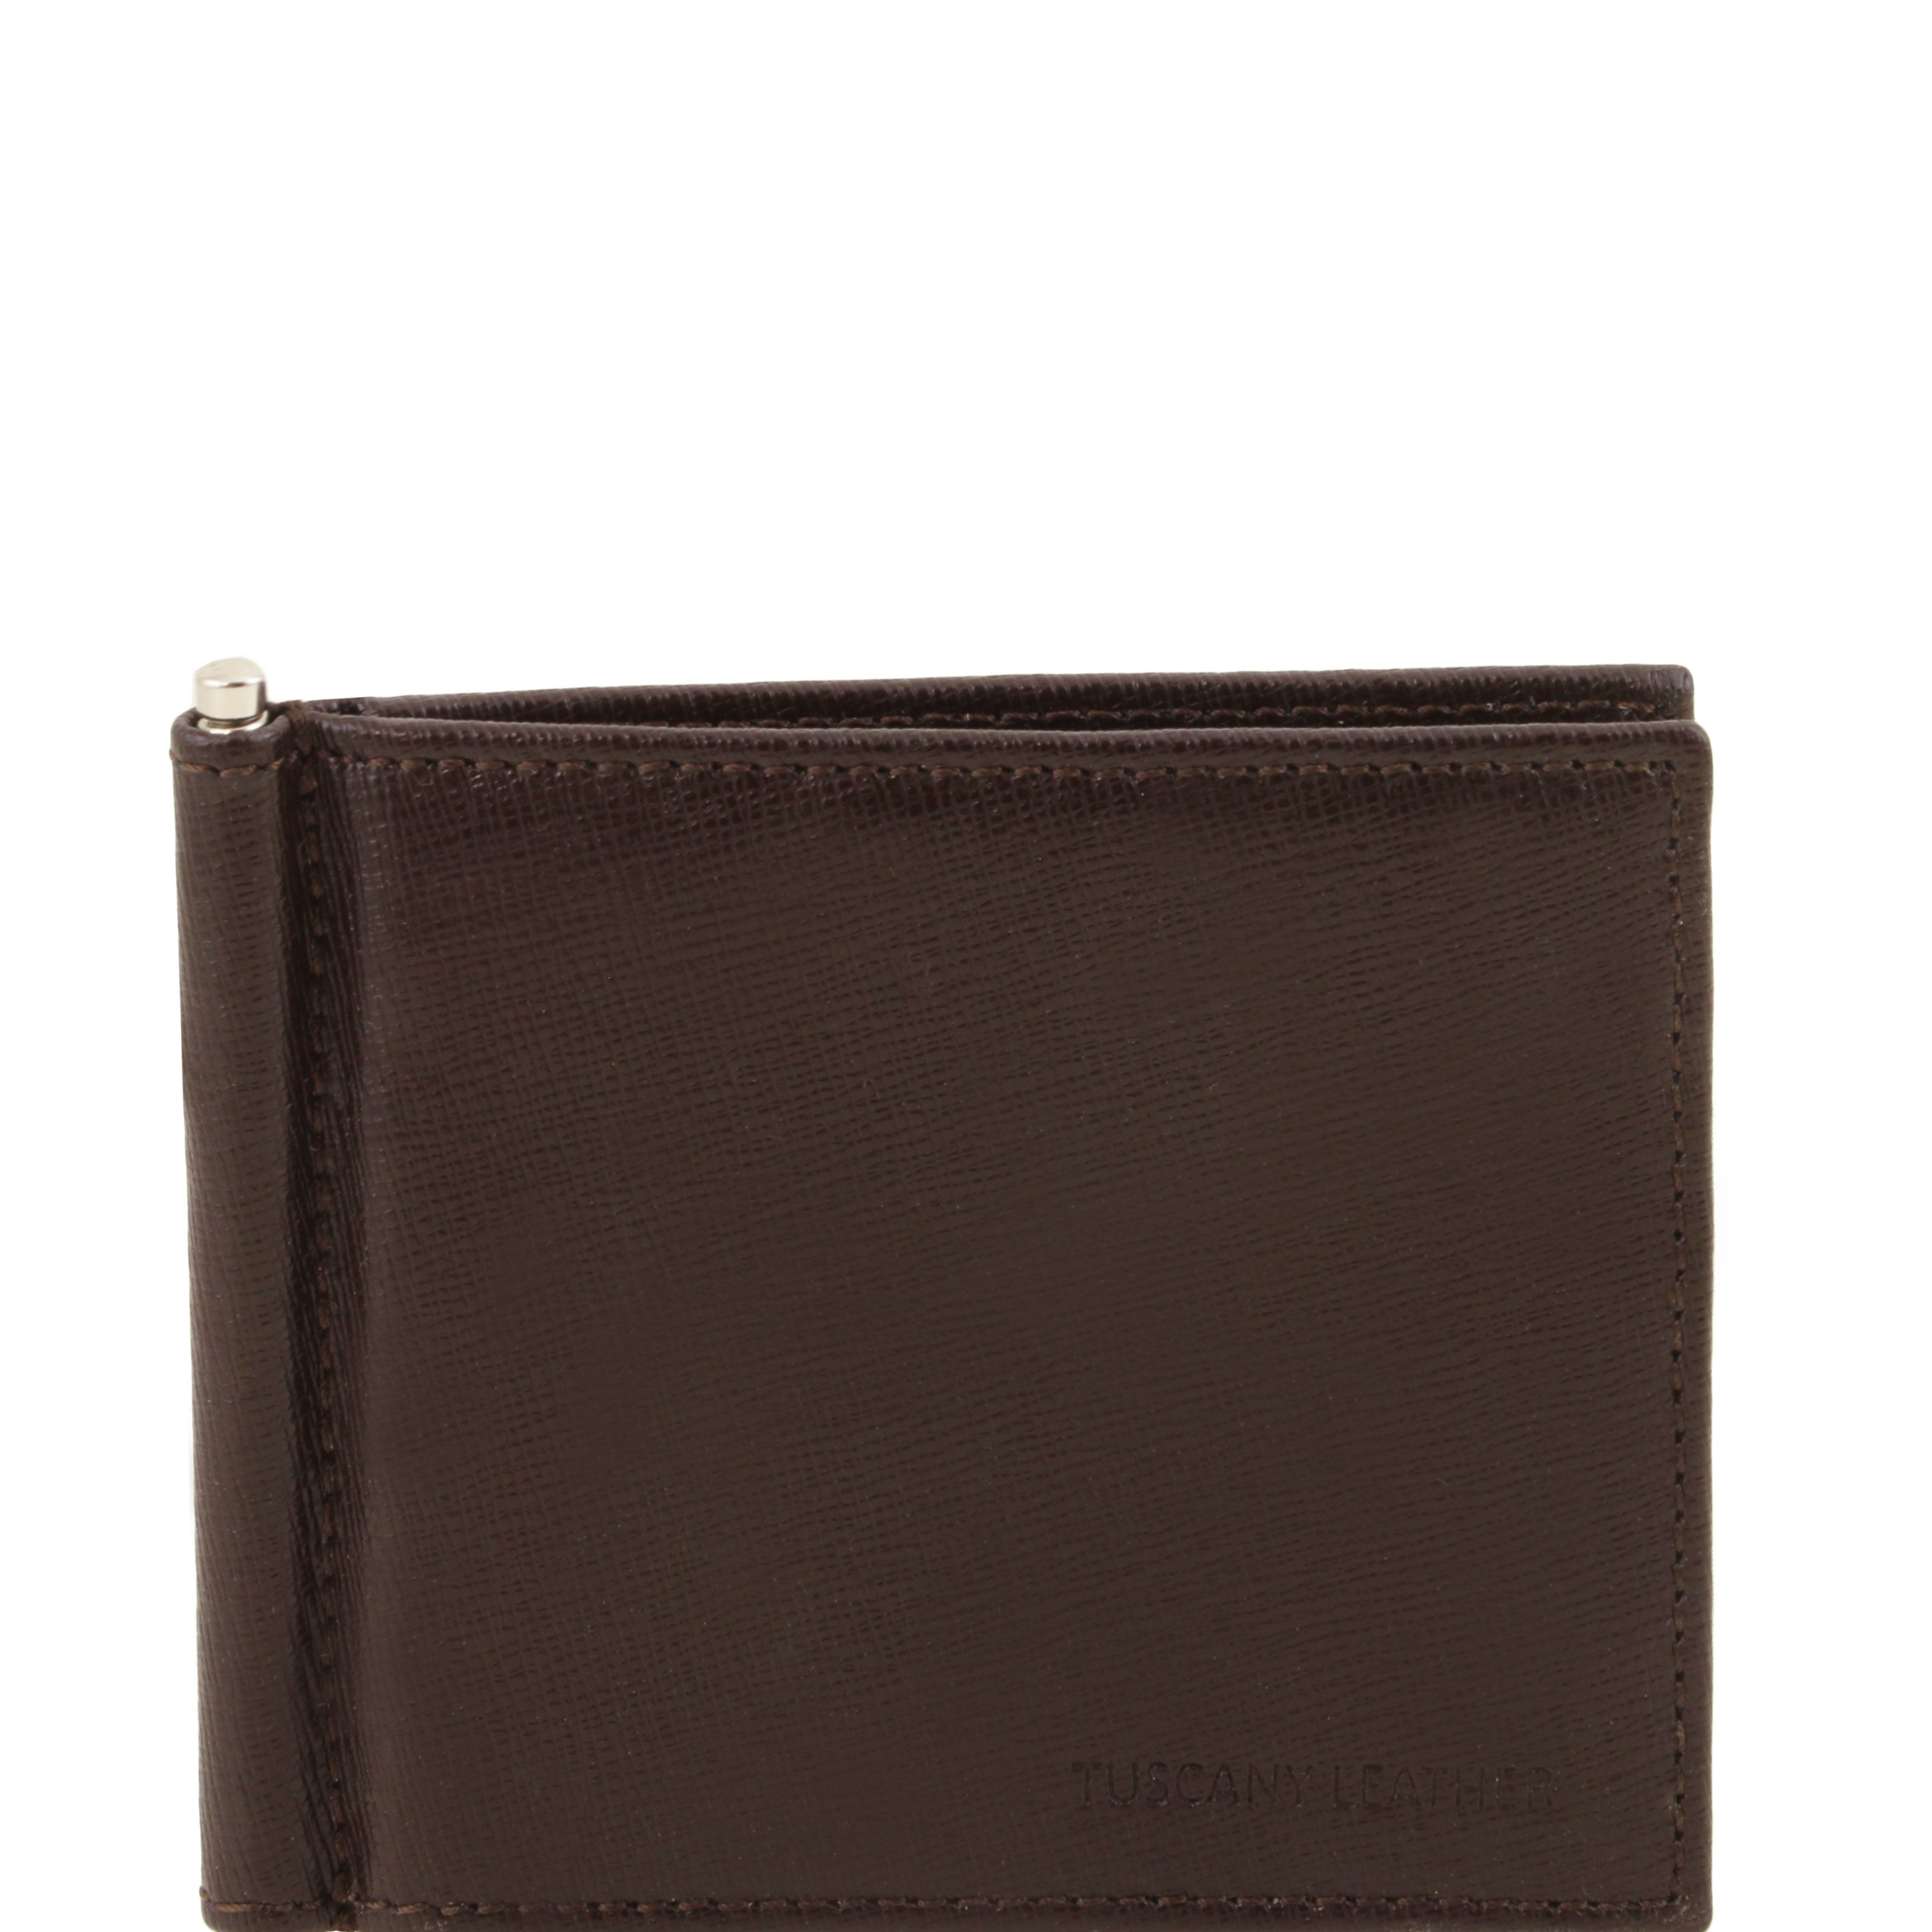 Exclusive Saffiano leather credit/business card with money clip Dark Brown